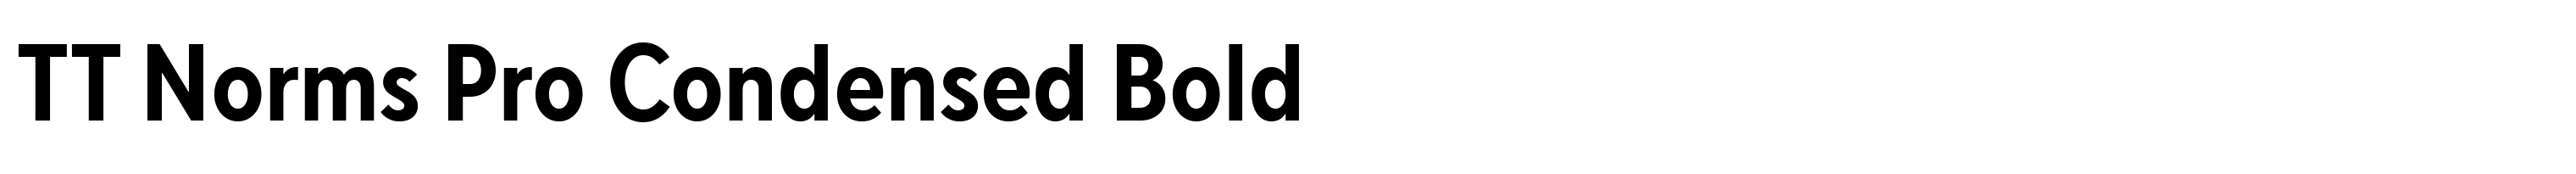 TT Norms Pro Condensed Bold